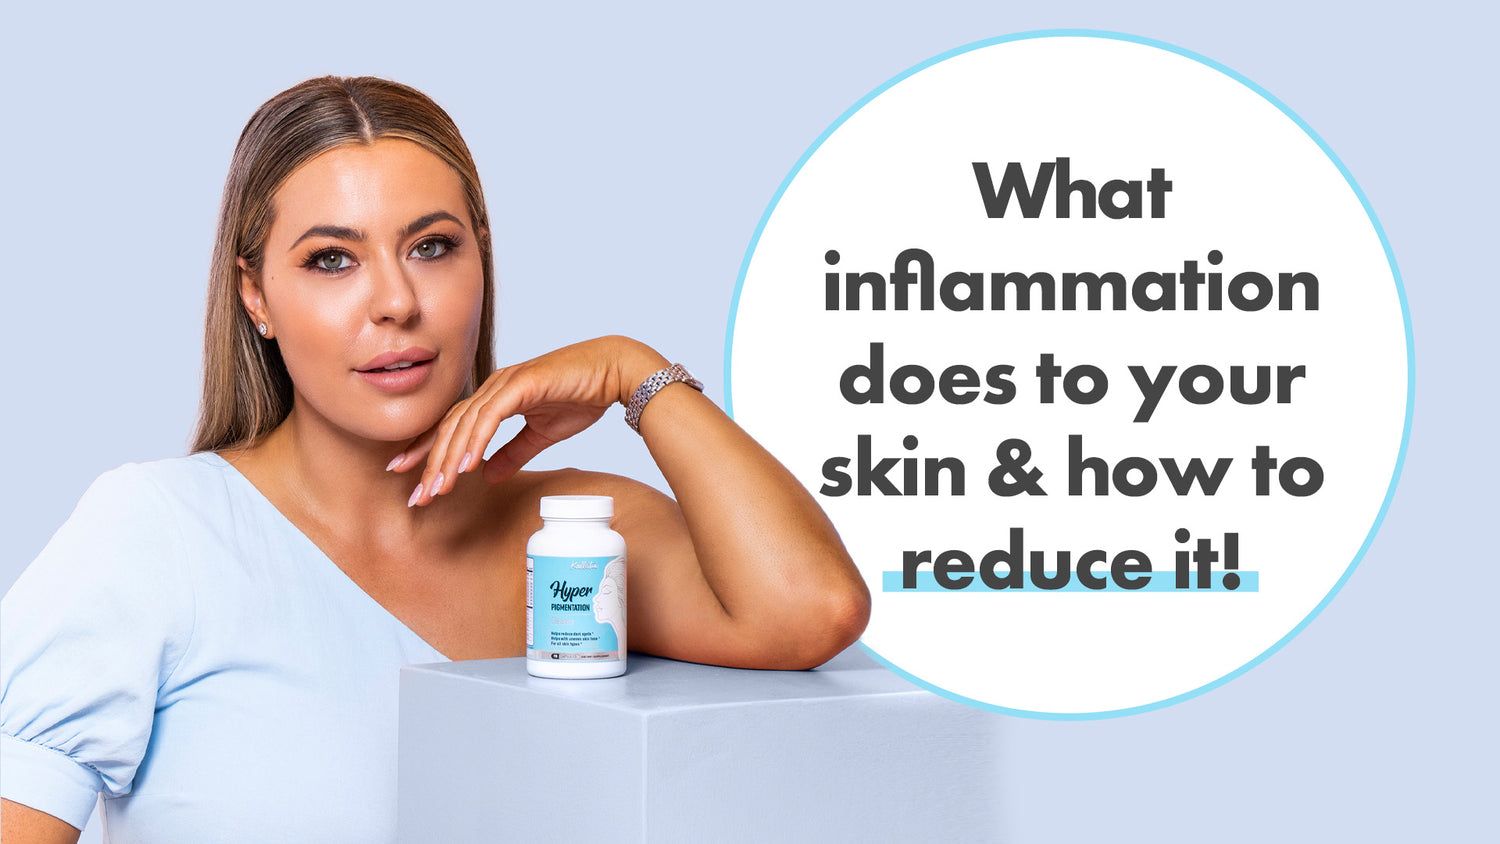 What inflammation does to your skin & how to reduce it!